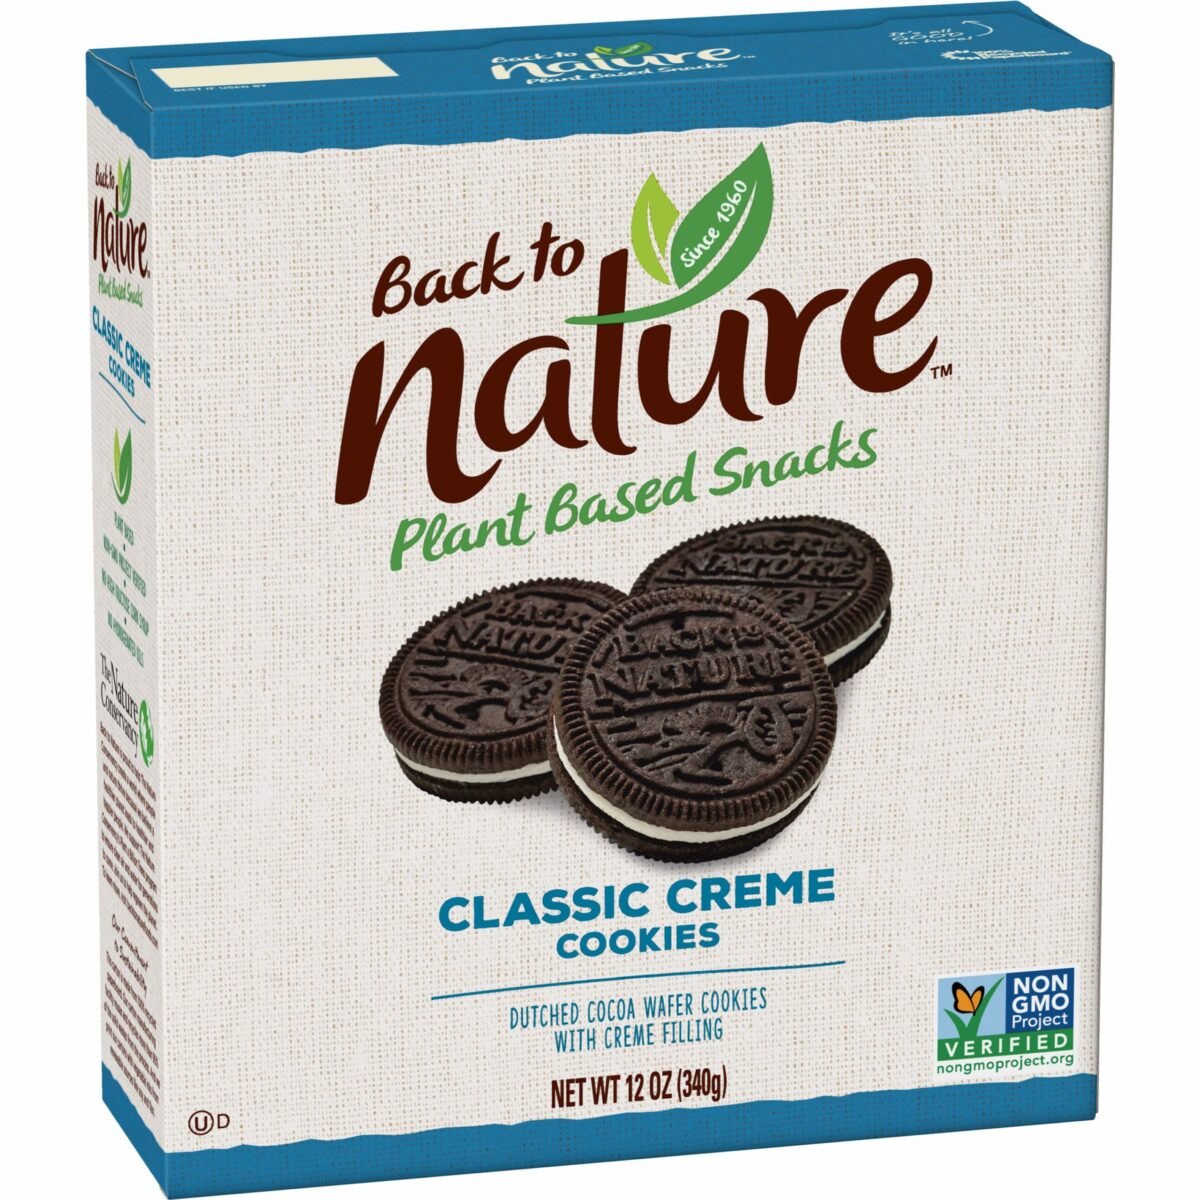 A packet of vegan oreo-style cookies from Back to Nature